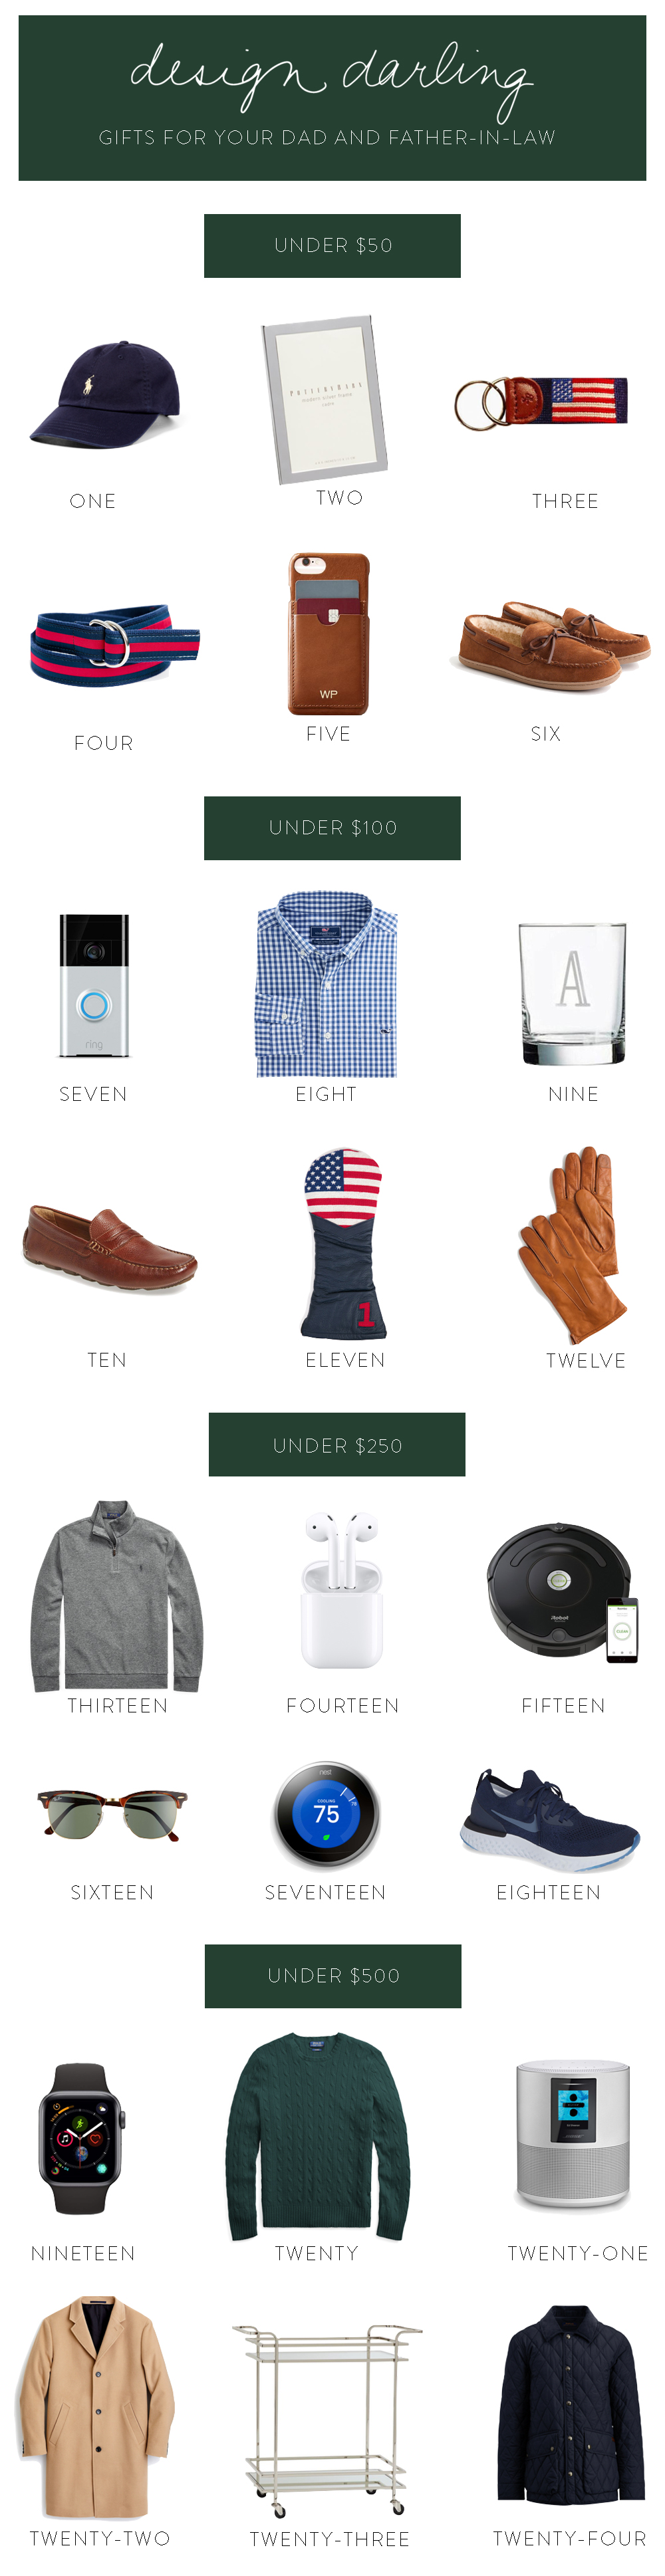 gifts for dad 2019 uk